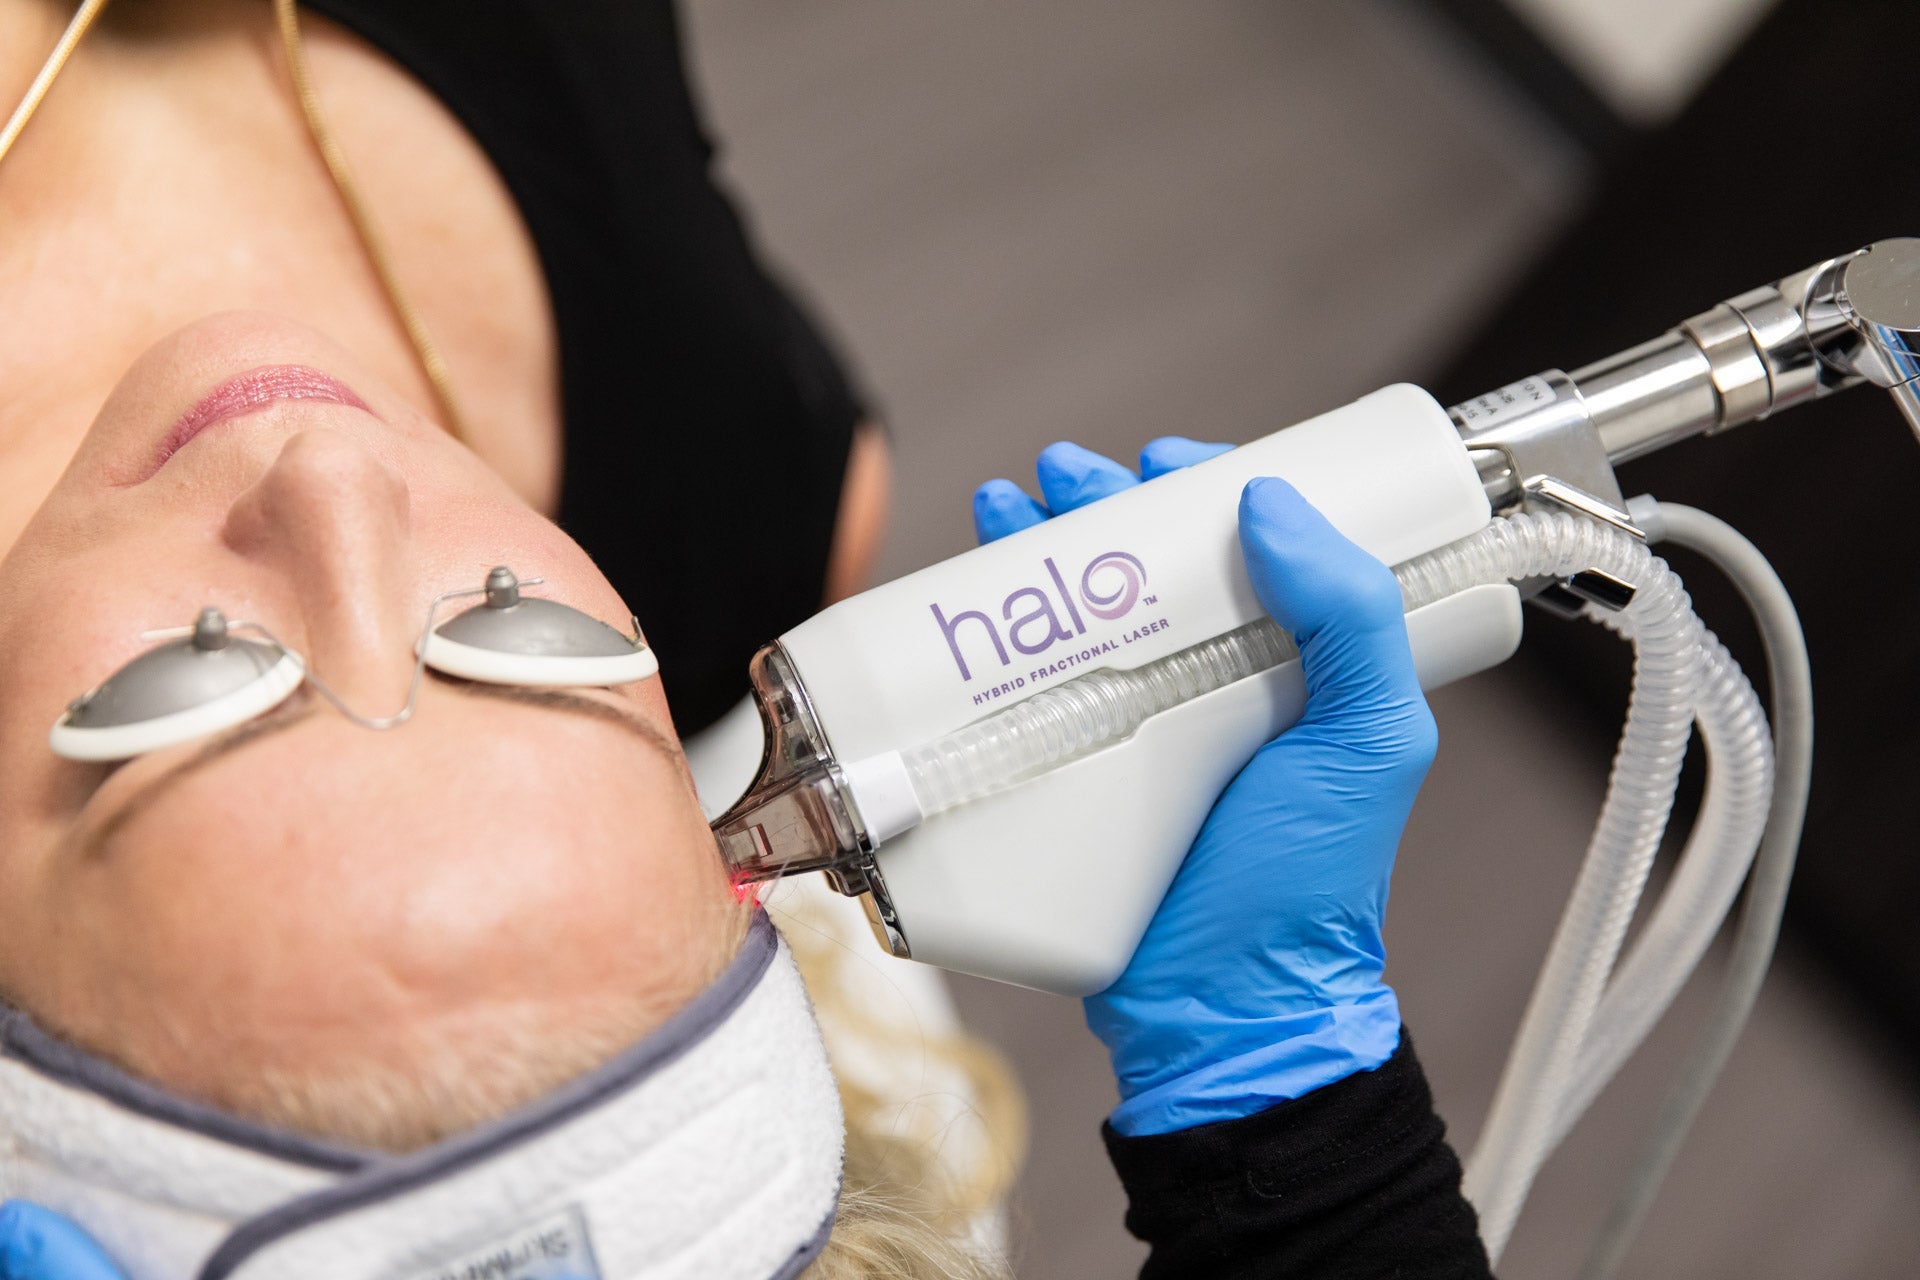 Sciton Stax: HALO Resurfacing single treatment with BBL course of 3 (save €375)